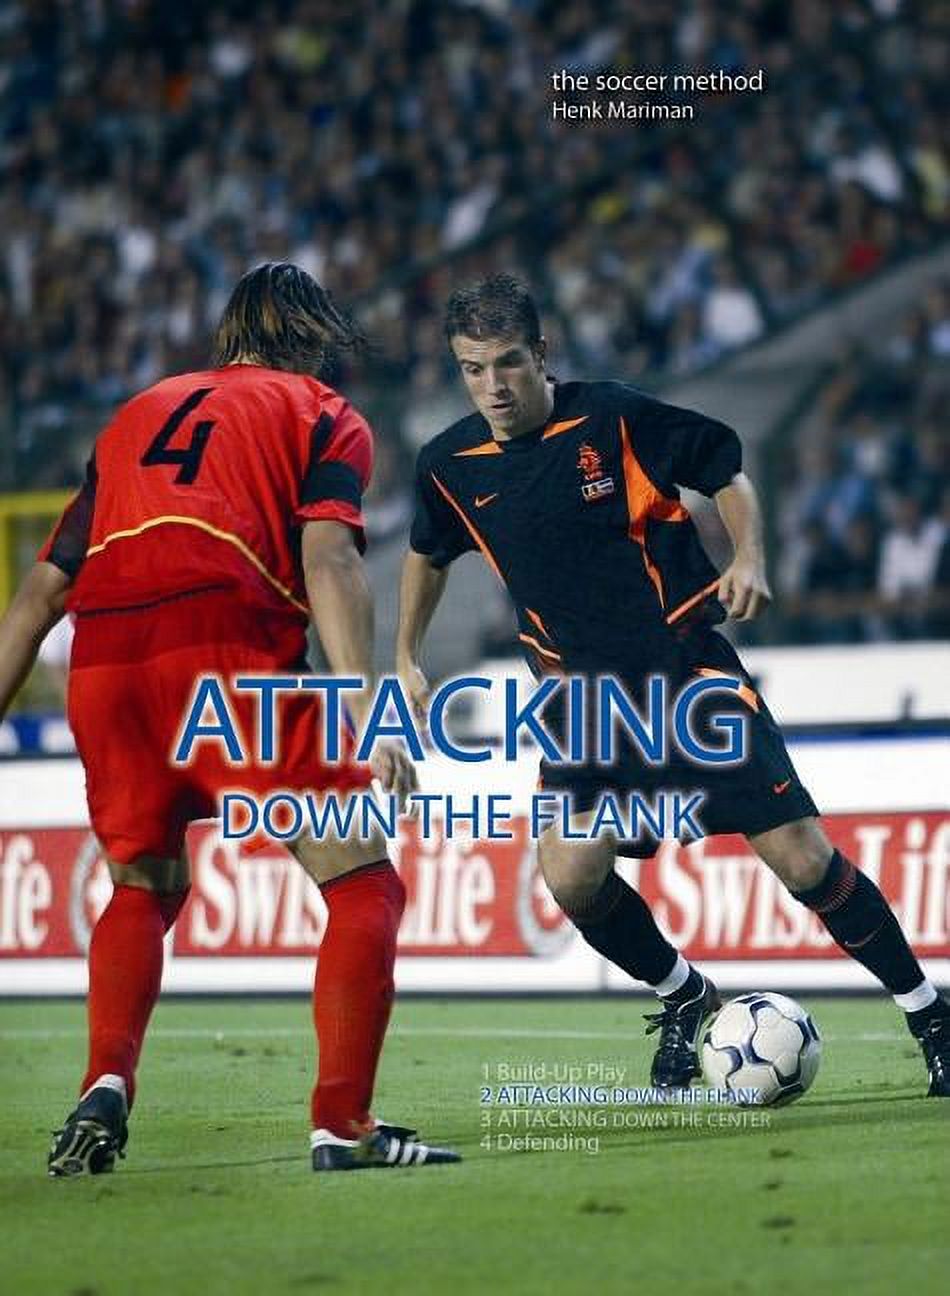 Soccer Method: Attacking Down the Flank (Series #02) (Paperback) - image 1 of 1